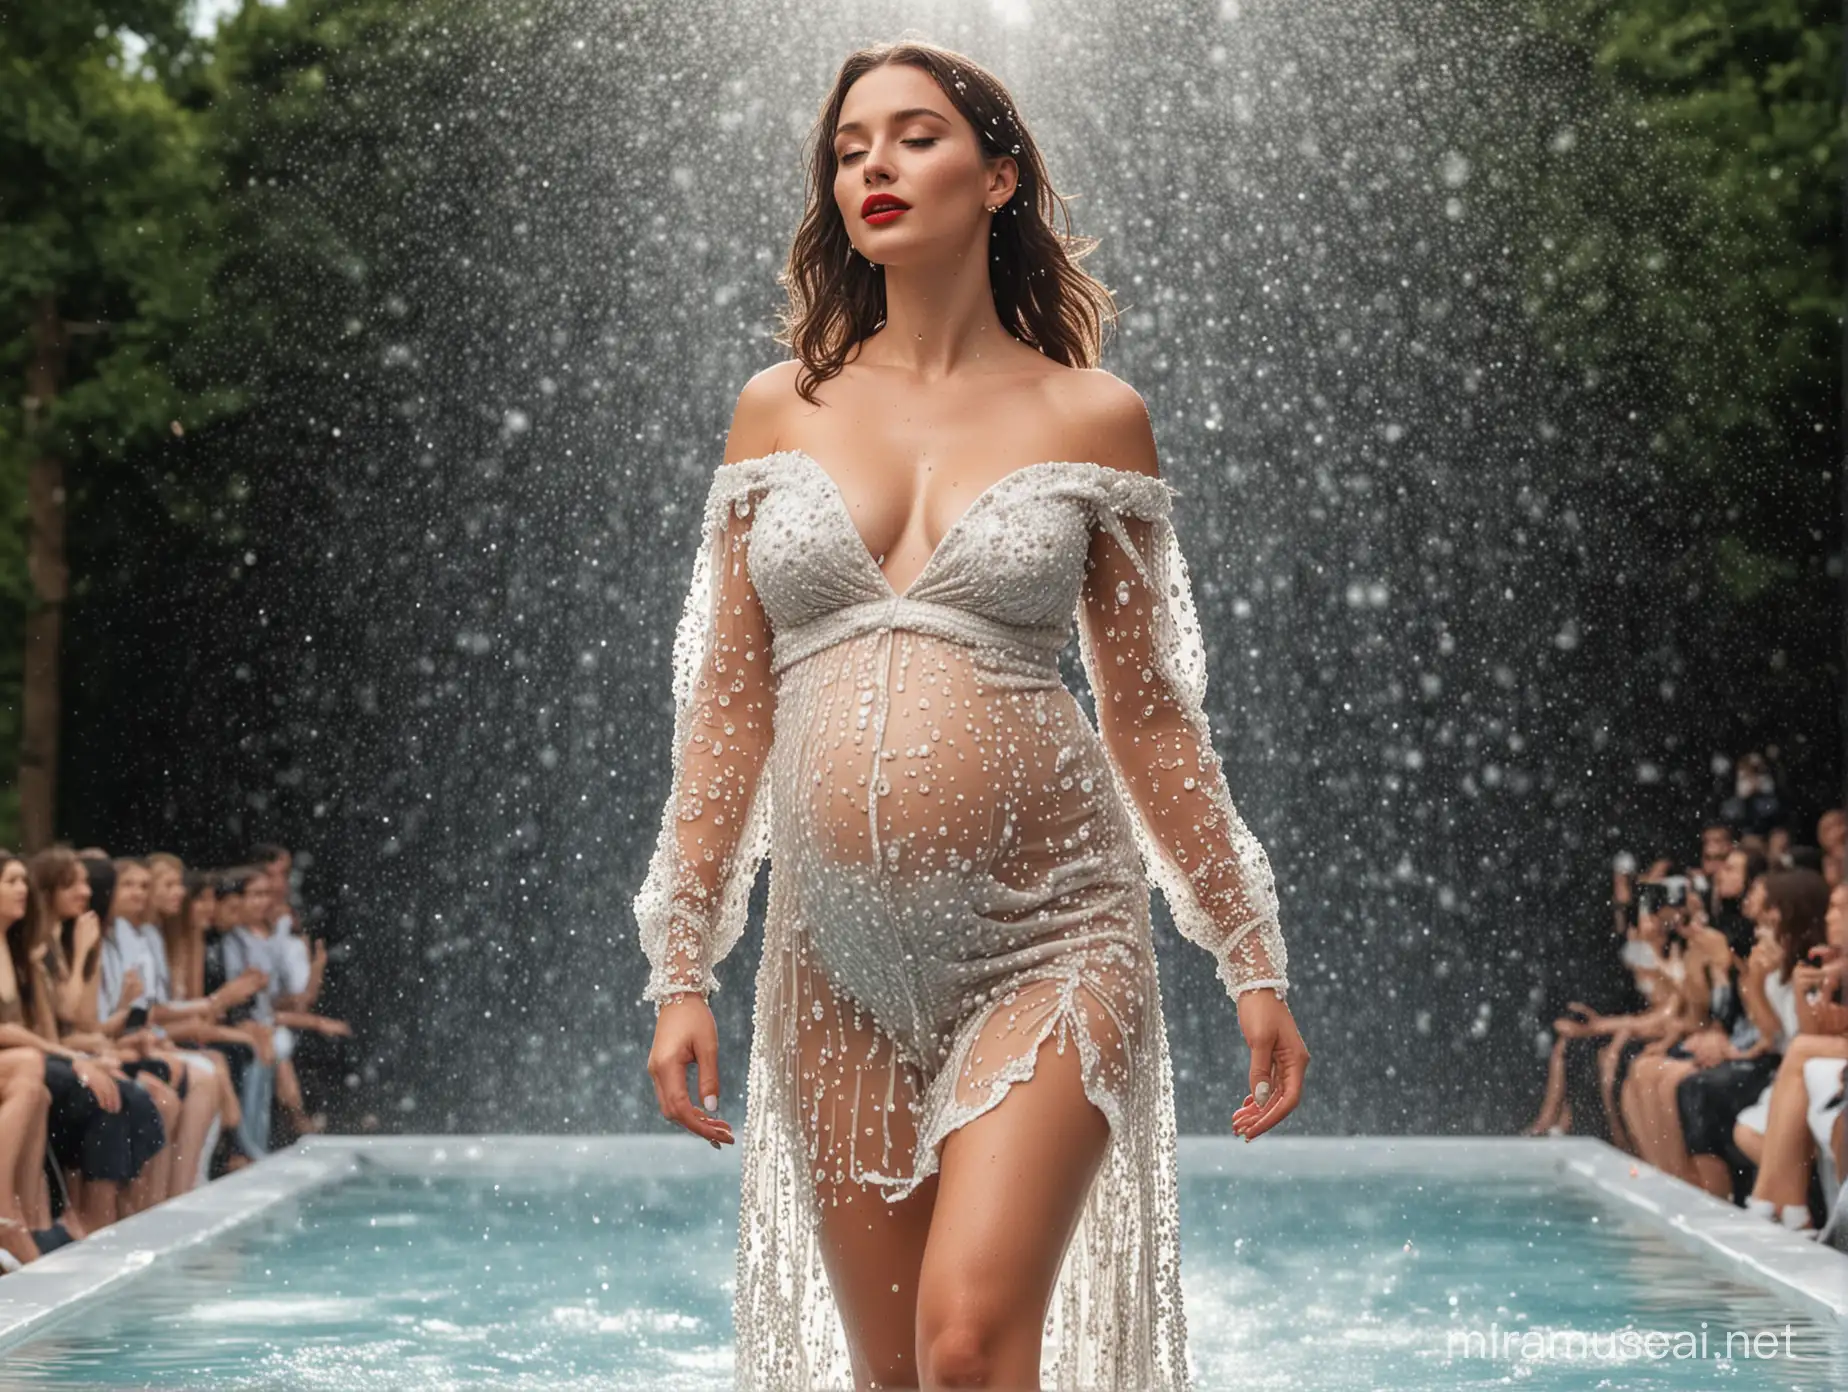 Pregnant Woman in High Fashion Couture Daytime Glamour with Water Droplets